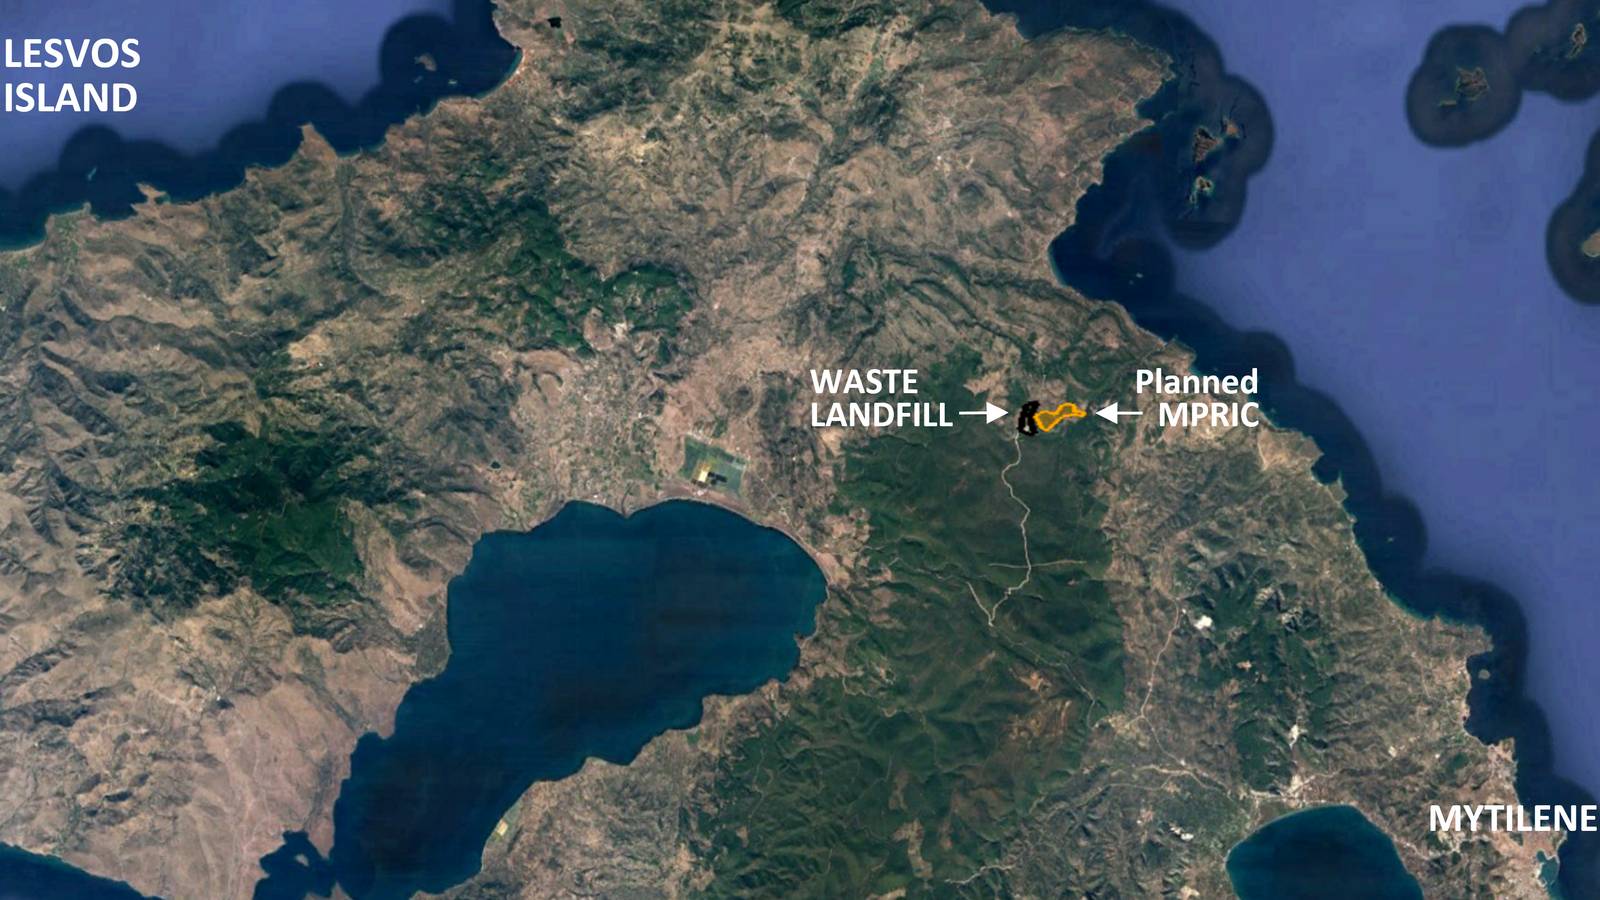 Location of the planned MPRIC and the waste landfill of Lesvos